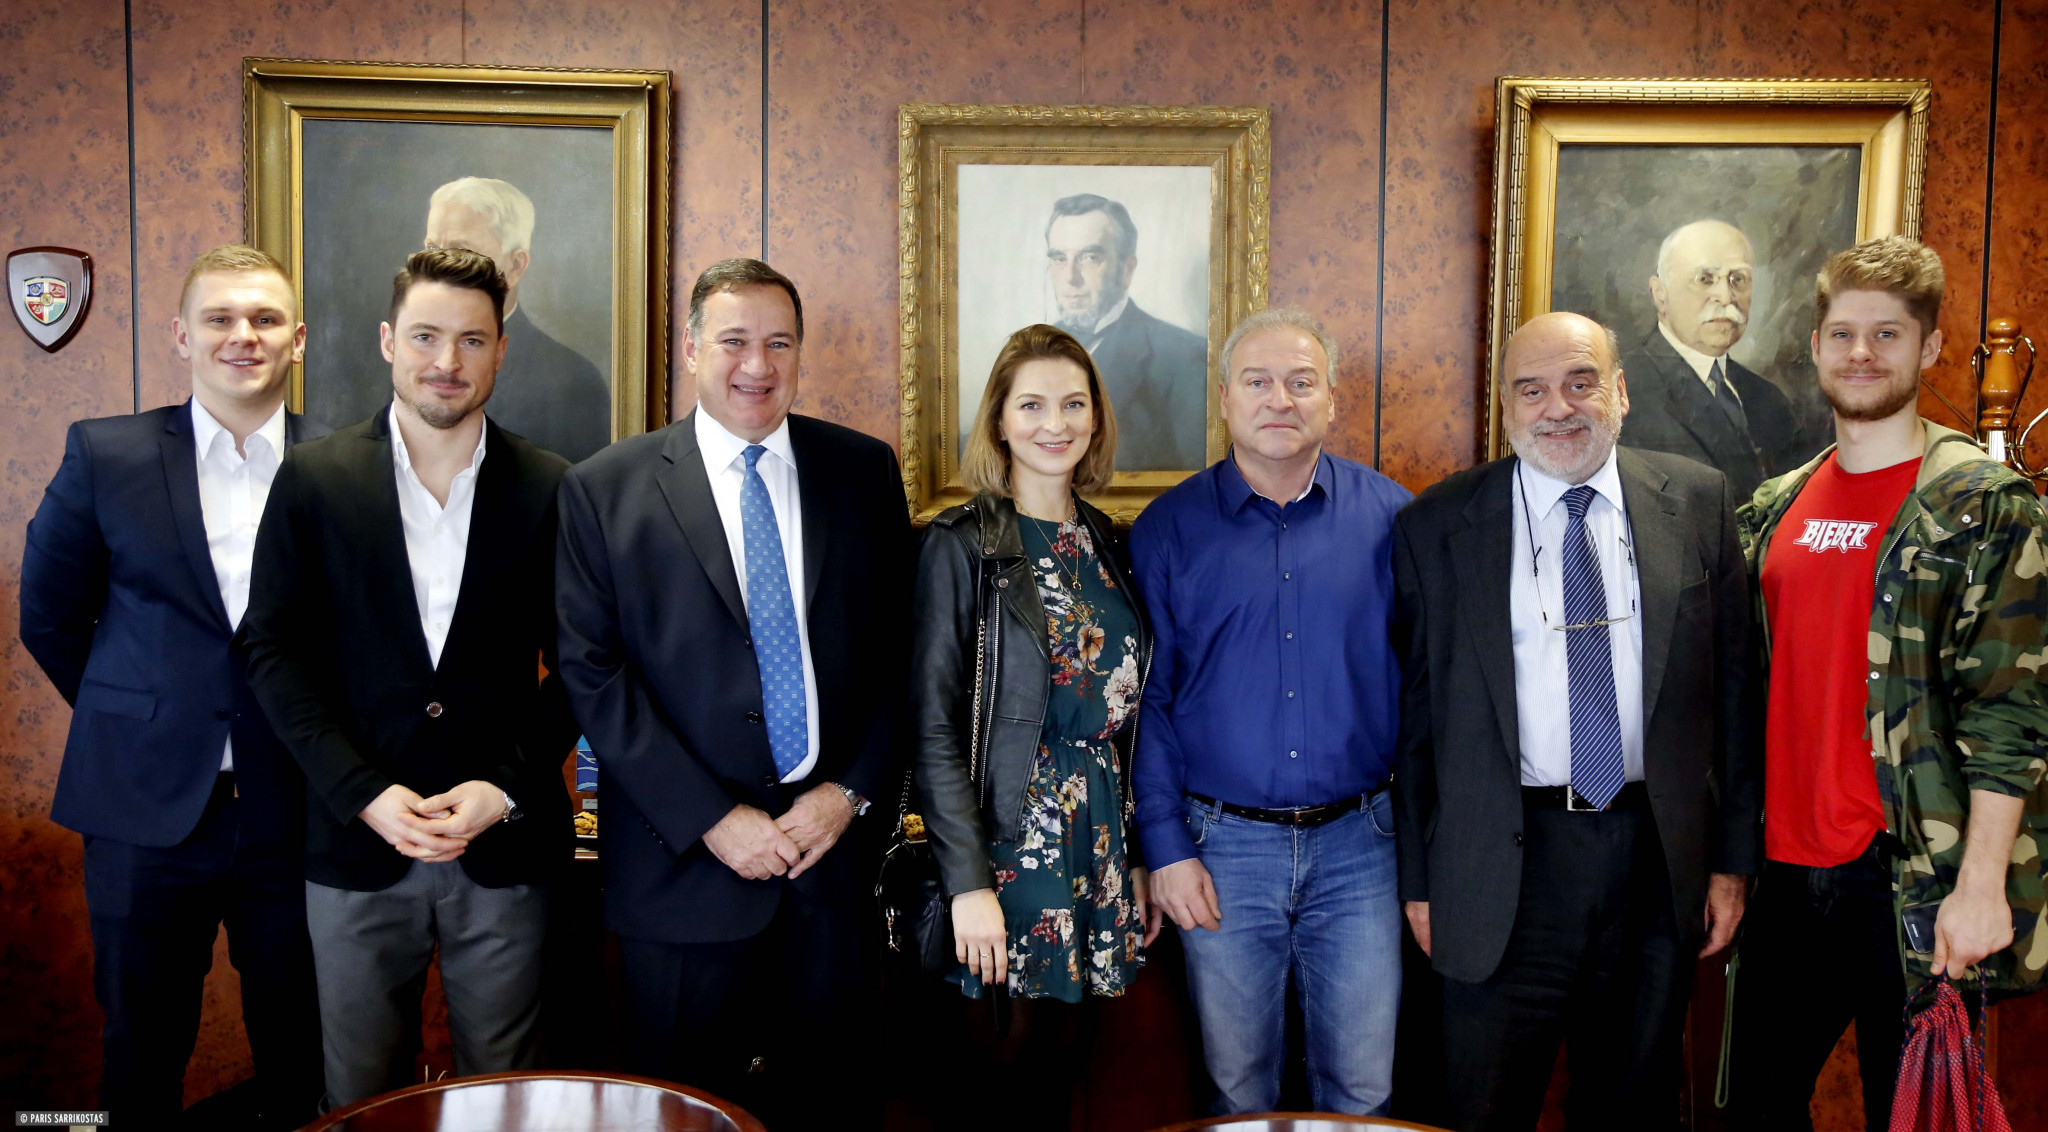 Hellenic Olympic Committee officials posing with figures from Polish sports clothing company 4F ©HOC/Facebook